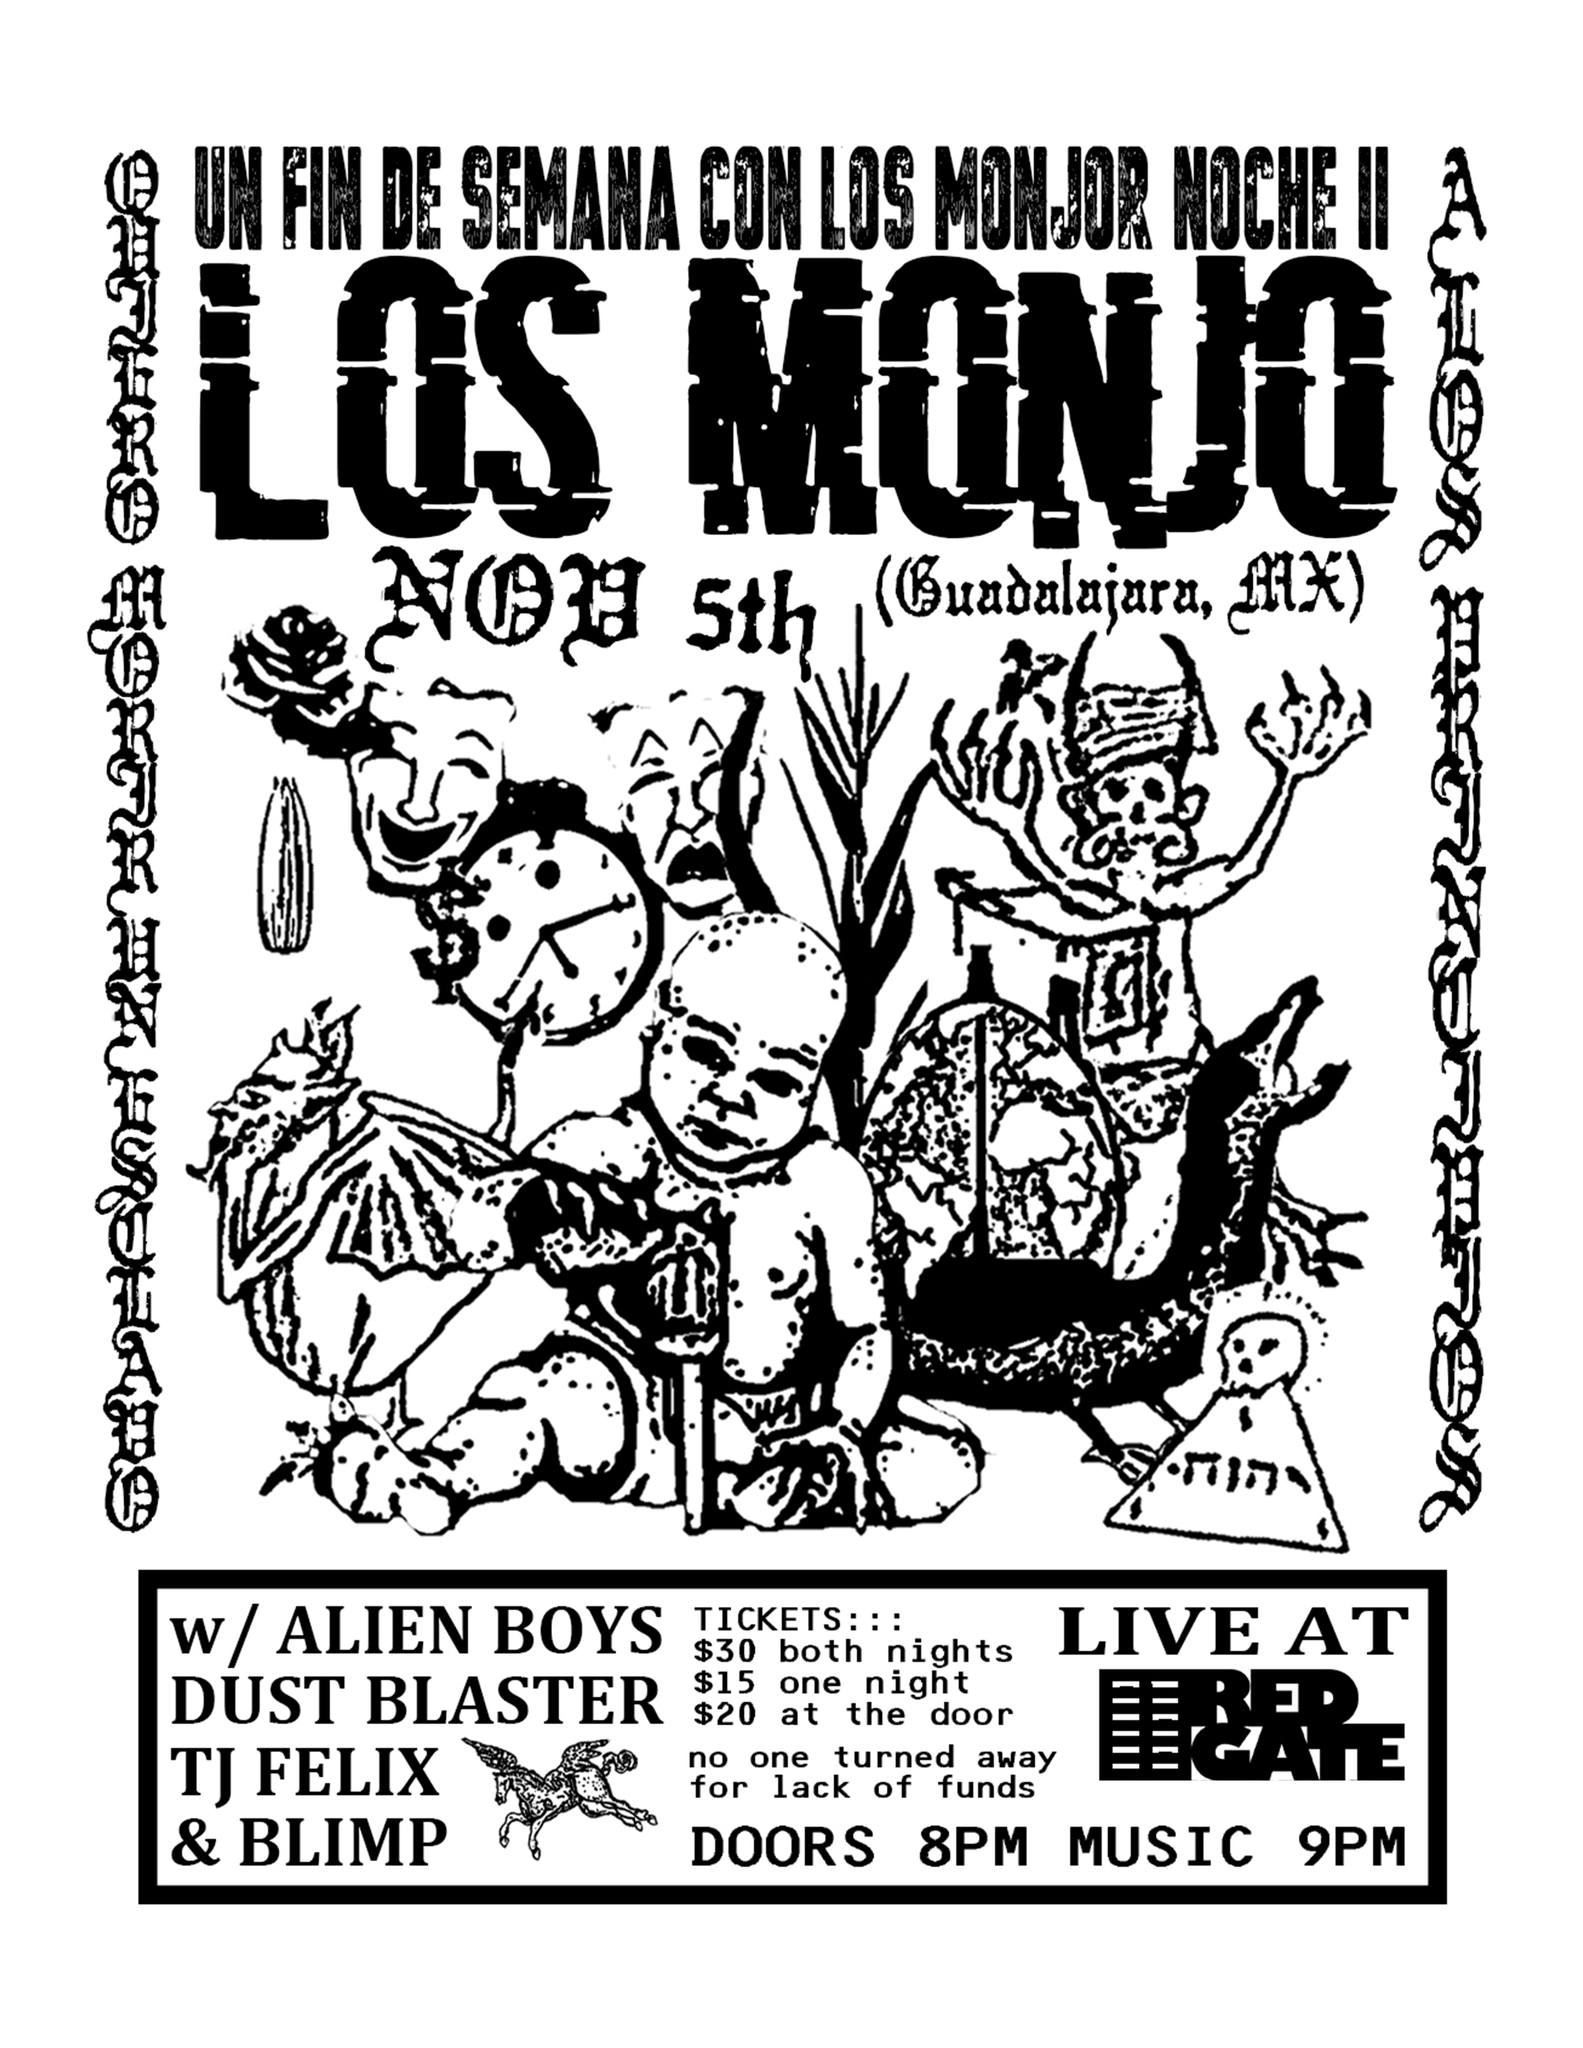 Playing with Los Monjos at the Redgate November 5